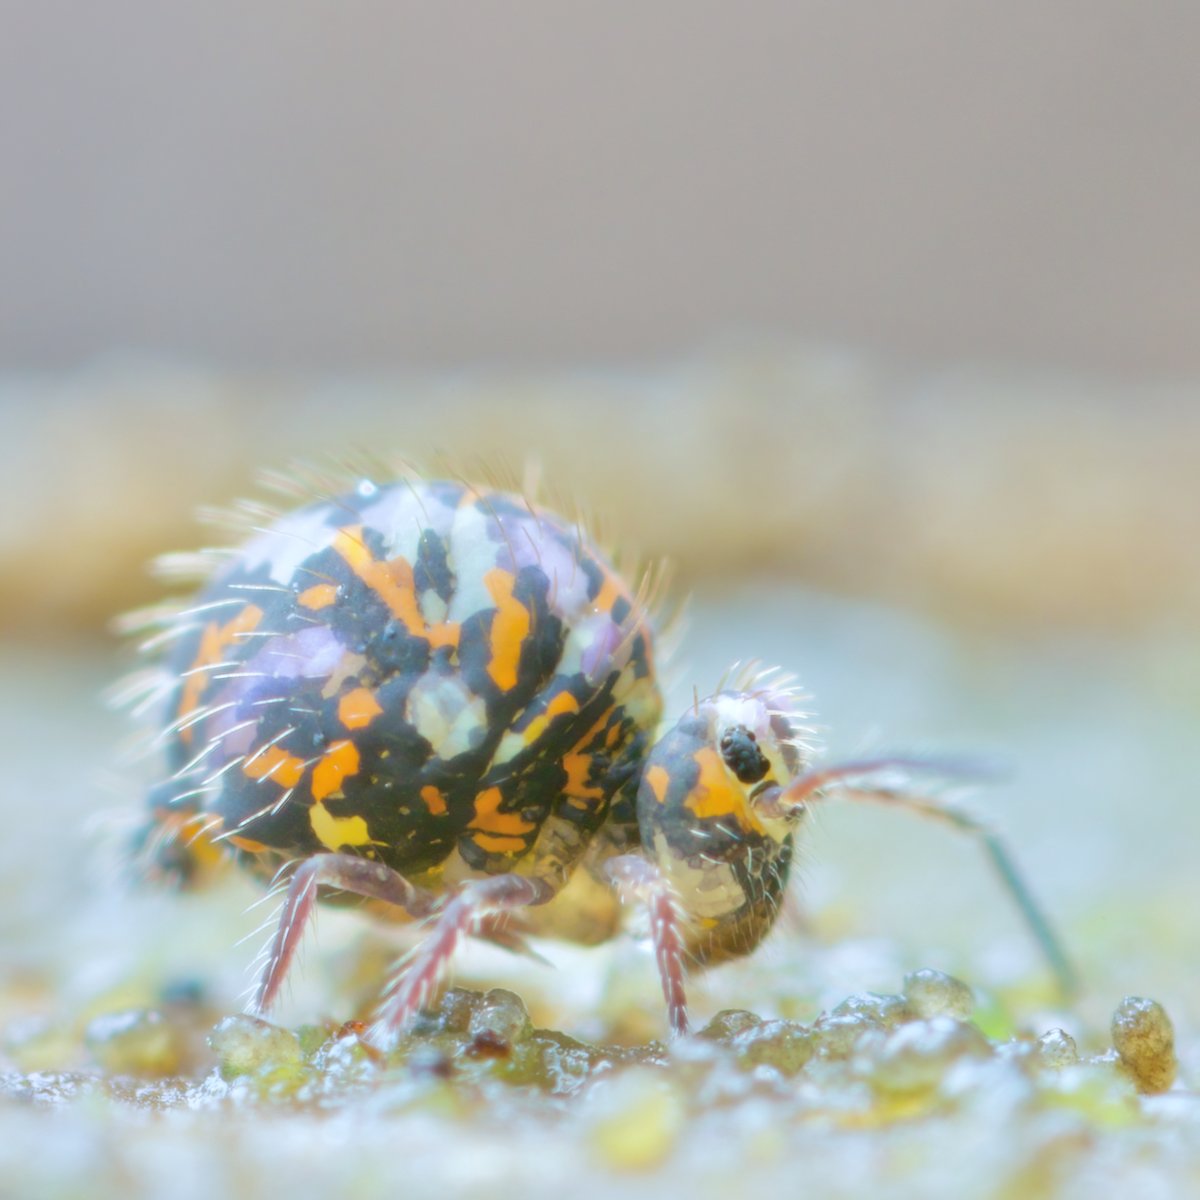 A contender for the most colours ever used by one springtail- a Katianna species from Tasmania, Australia... #springtail #collembola #soilanimal #mesofauna chaosofdelight.org